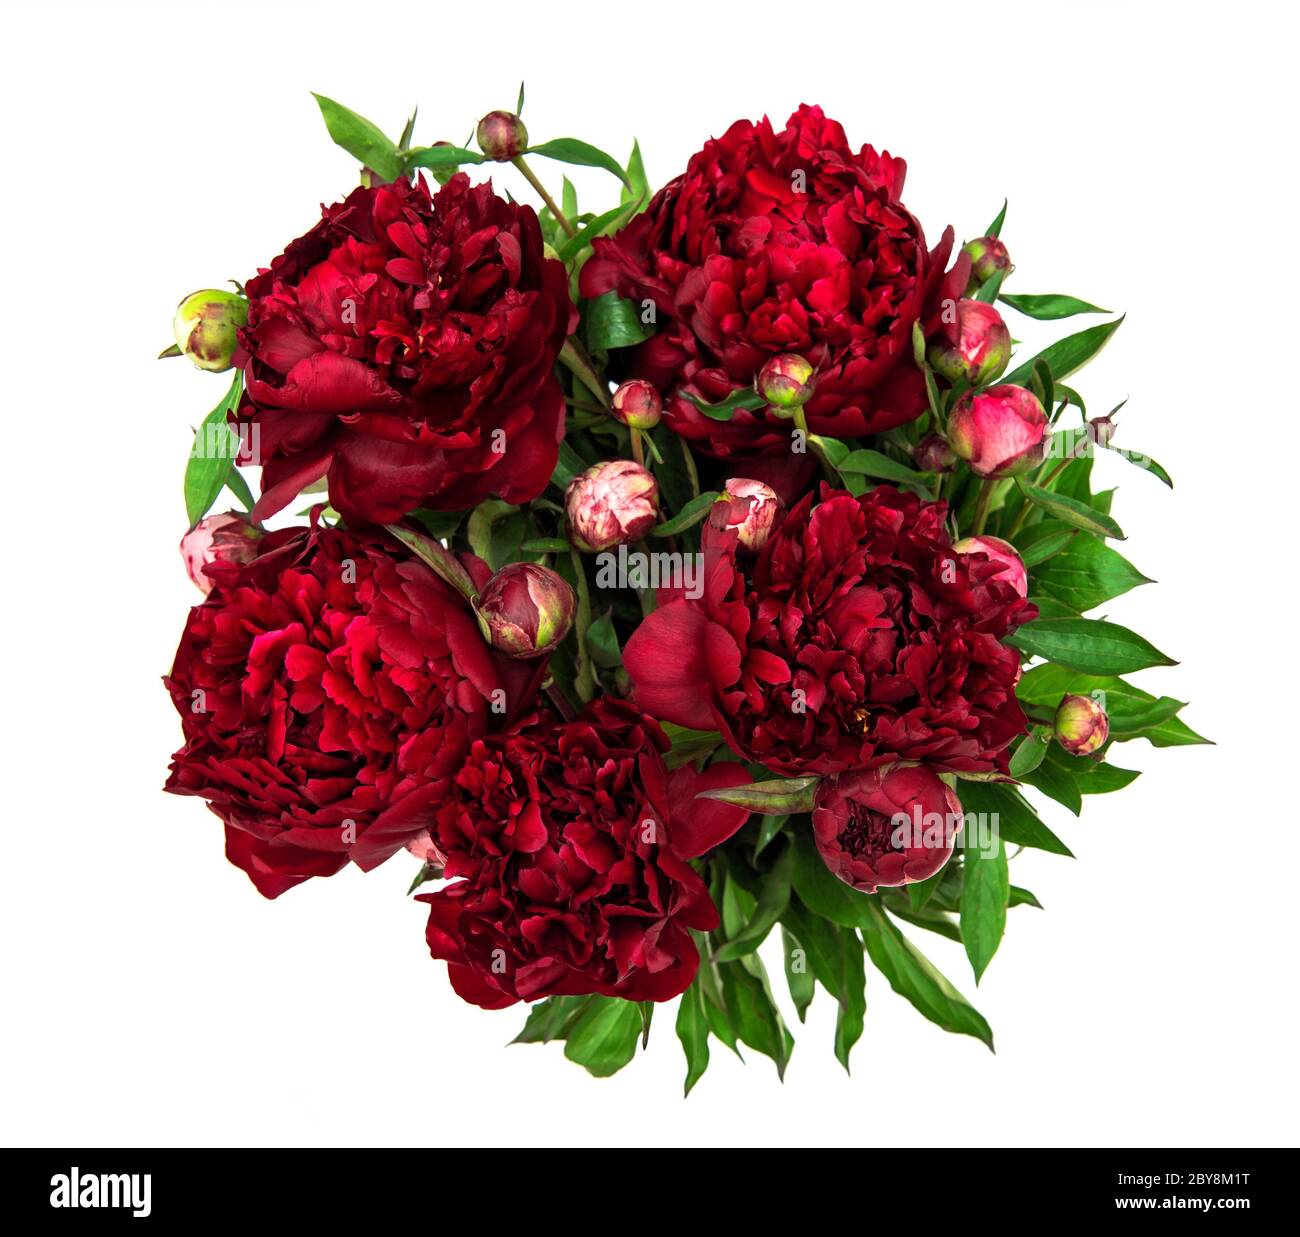 Peony flowers bouquet isolated on white background. Dark red flower head Stock Photo